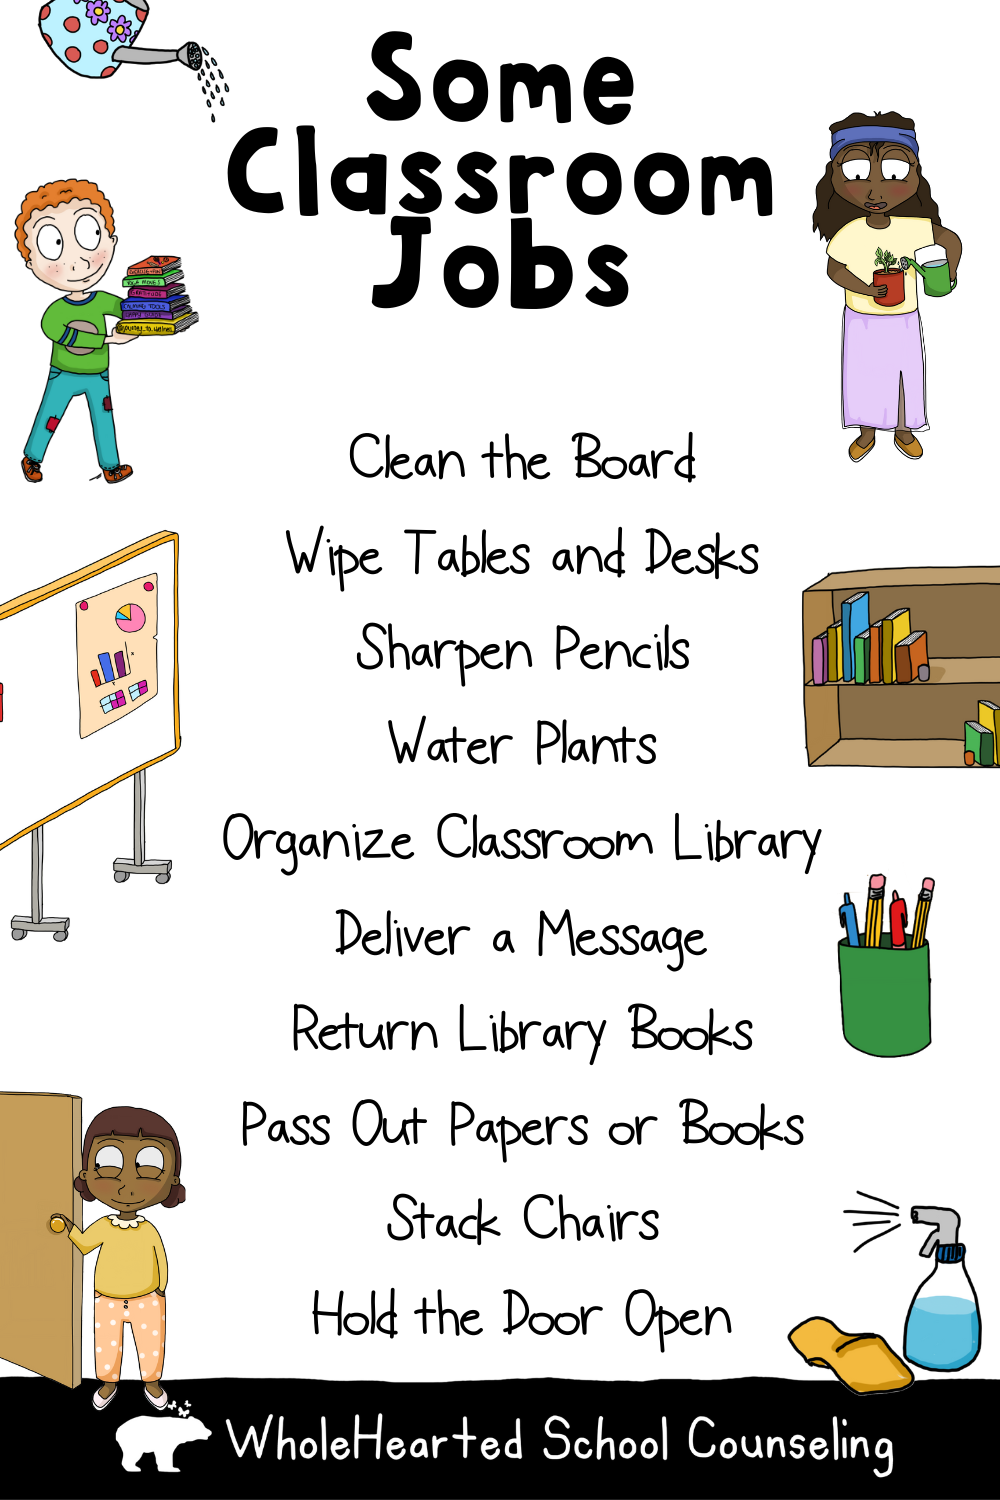 List of classroom jobs for elementary students.